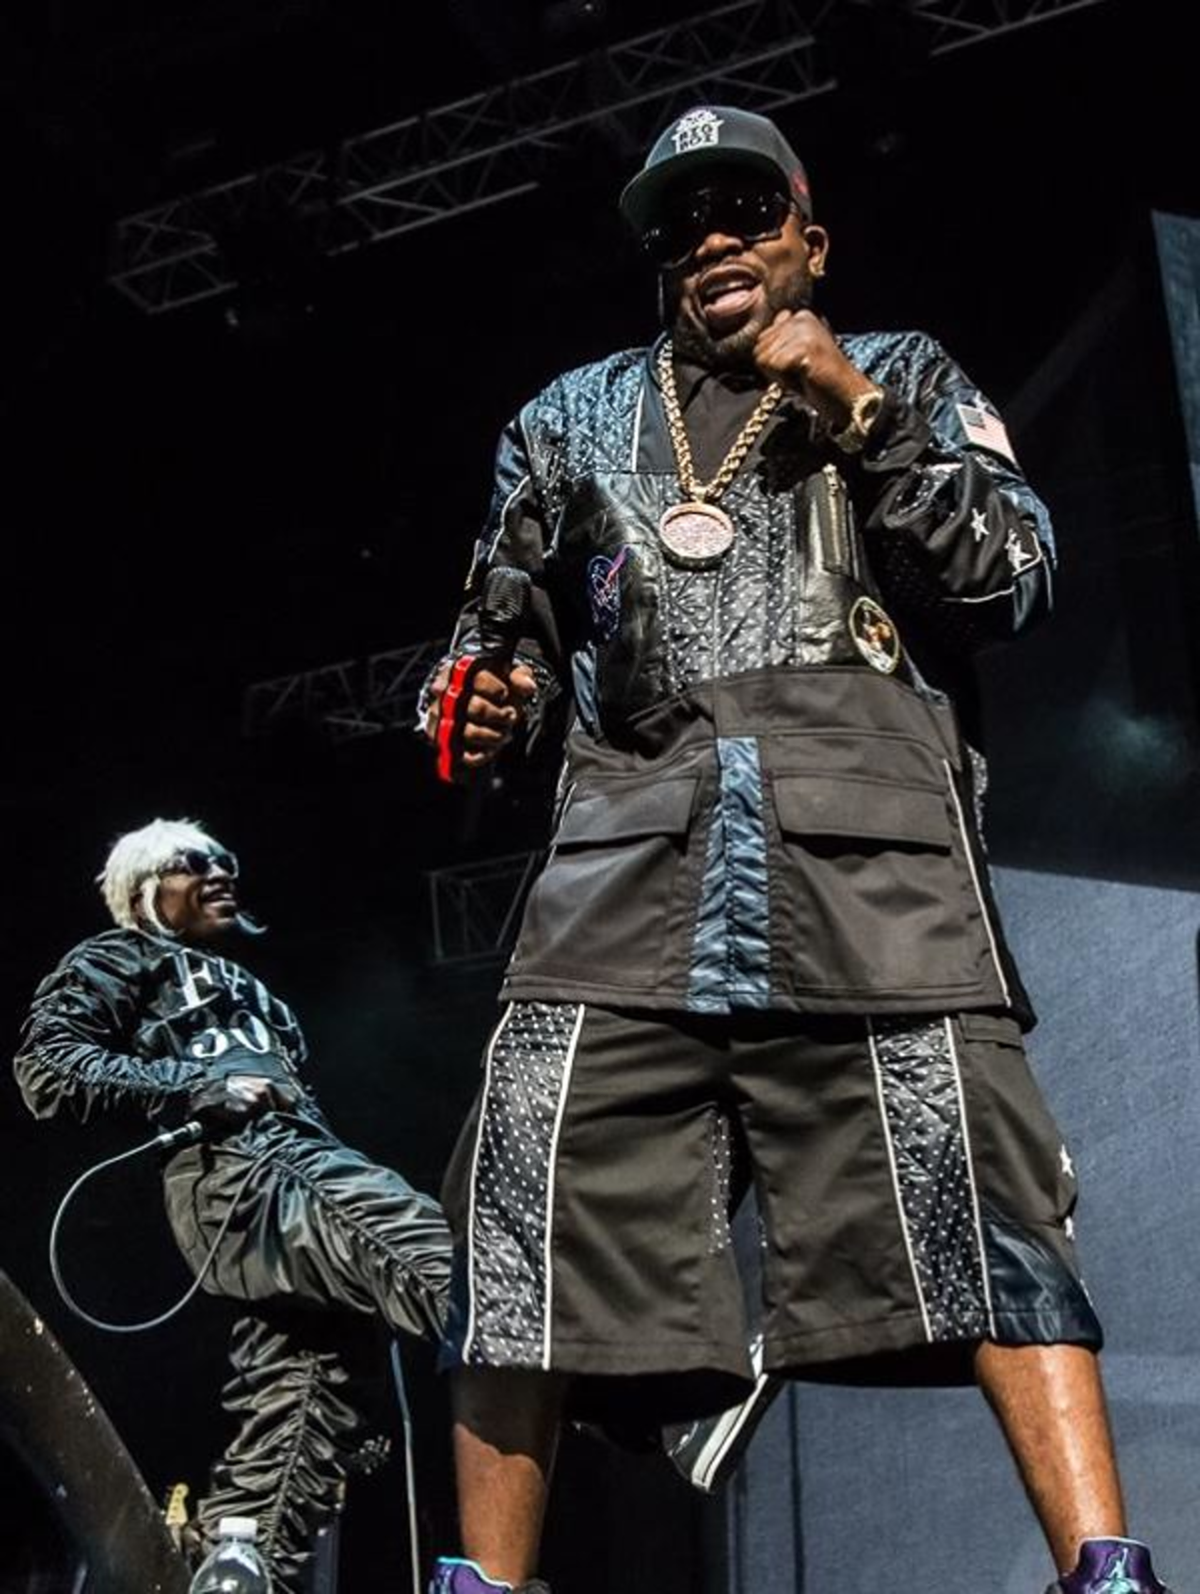 Concert review Big Guava Music Festival, Day 1 (Friday) with Outkast